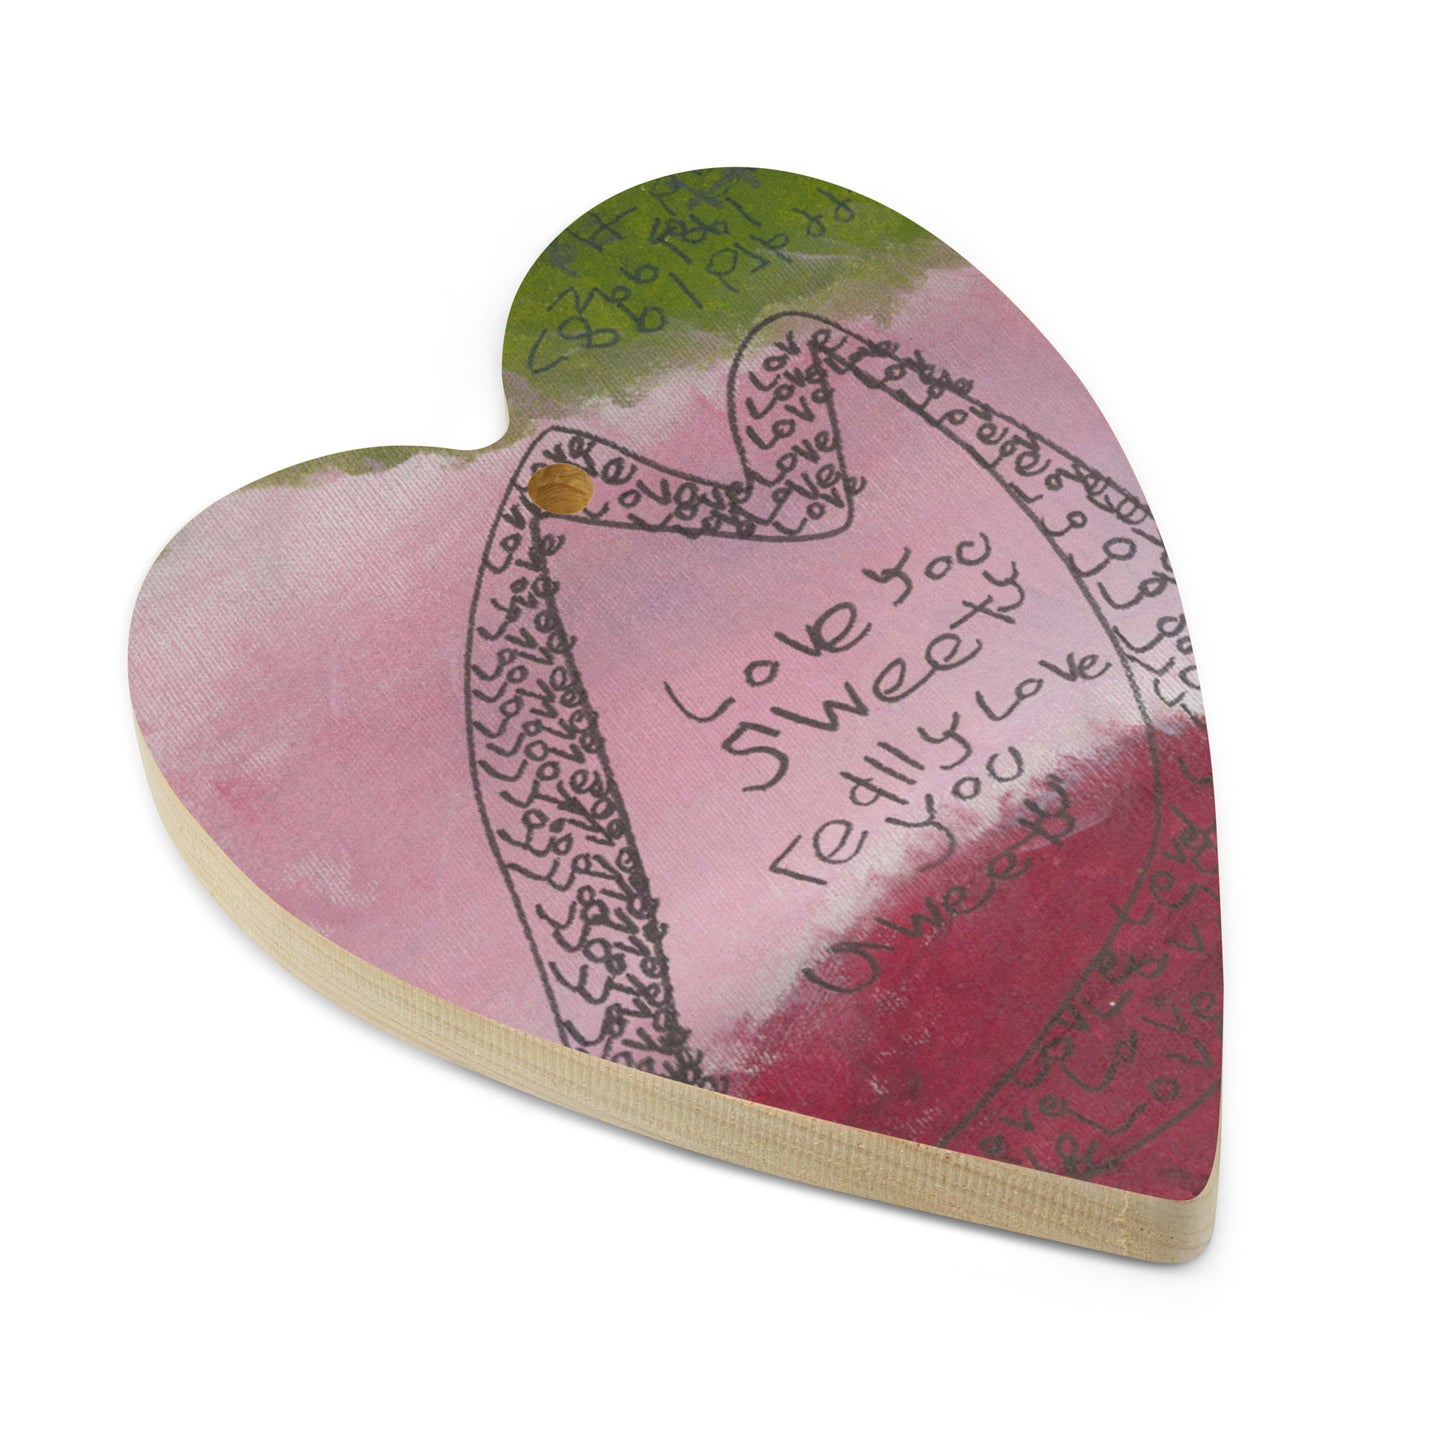 Wooden ornament & magnet - "Love and True Love"